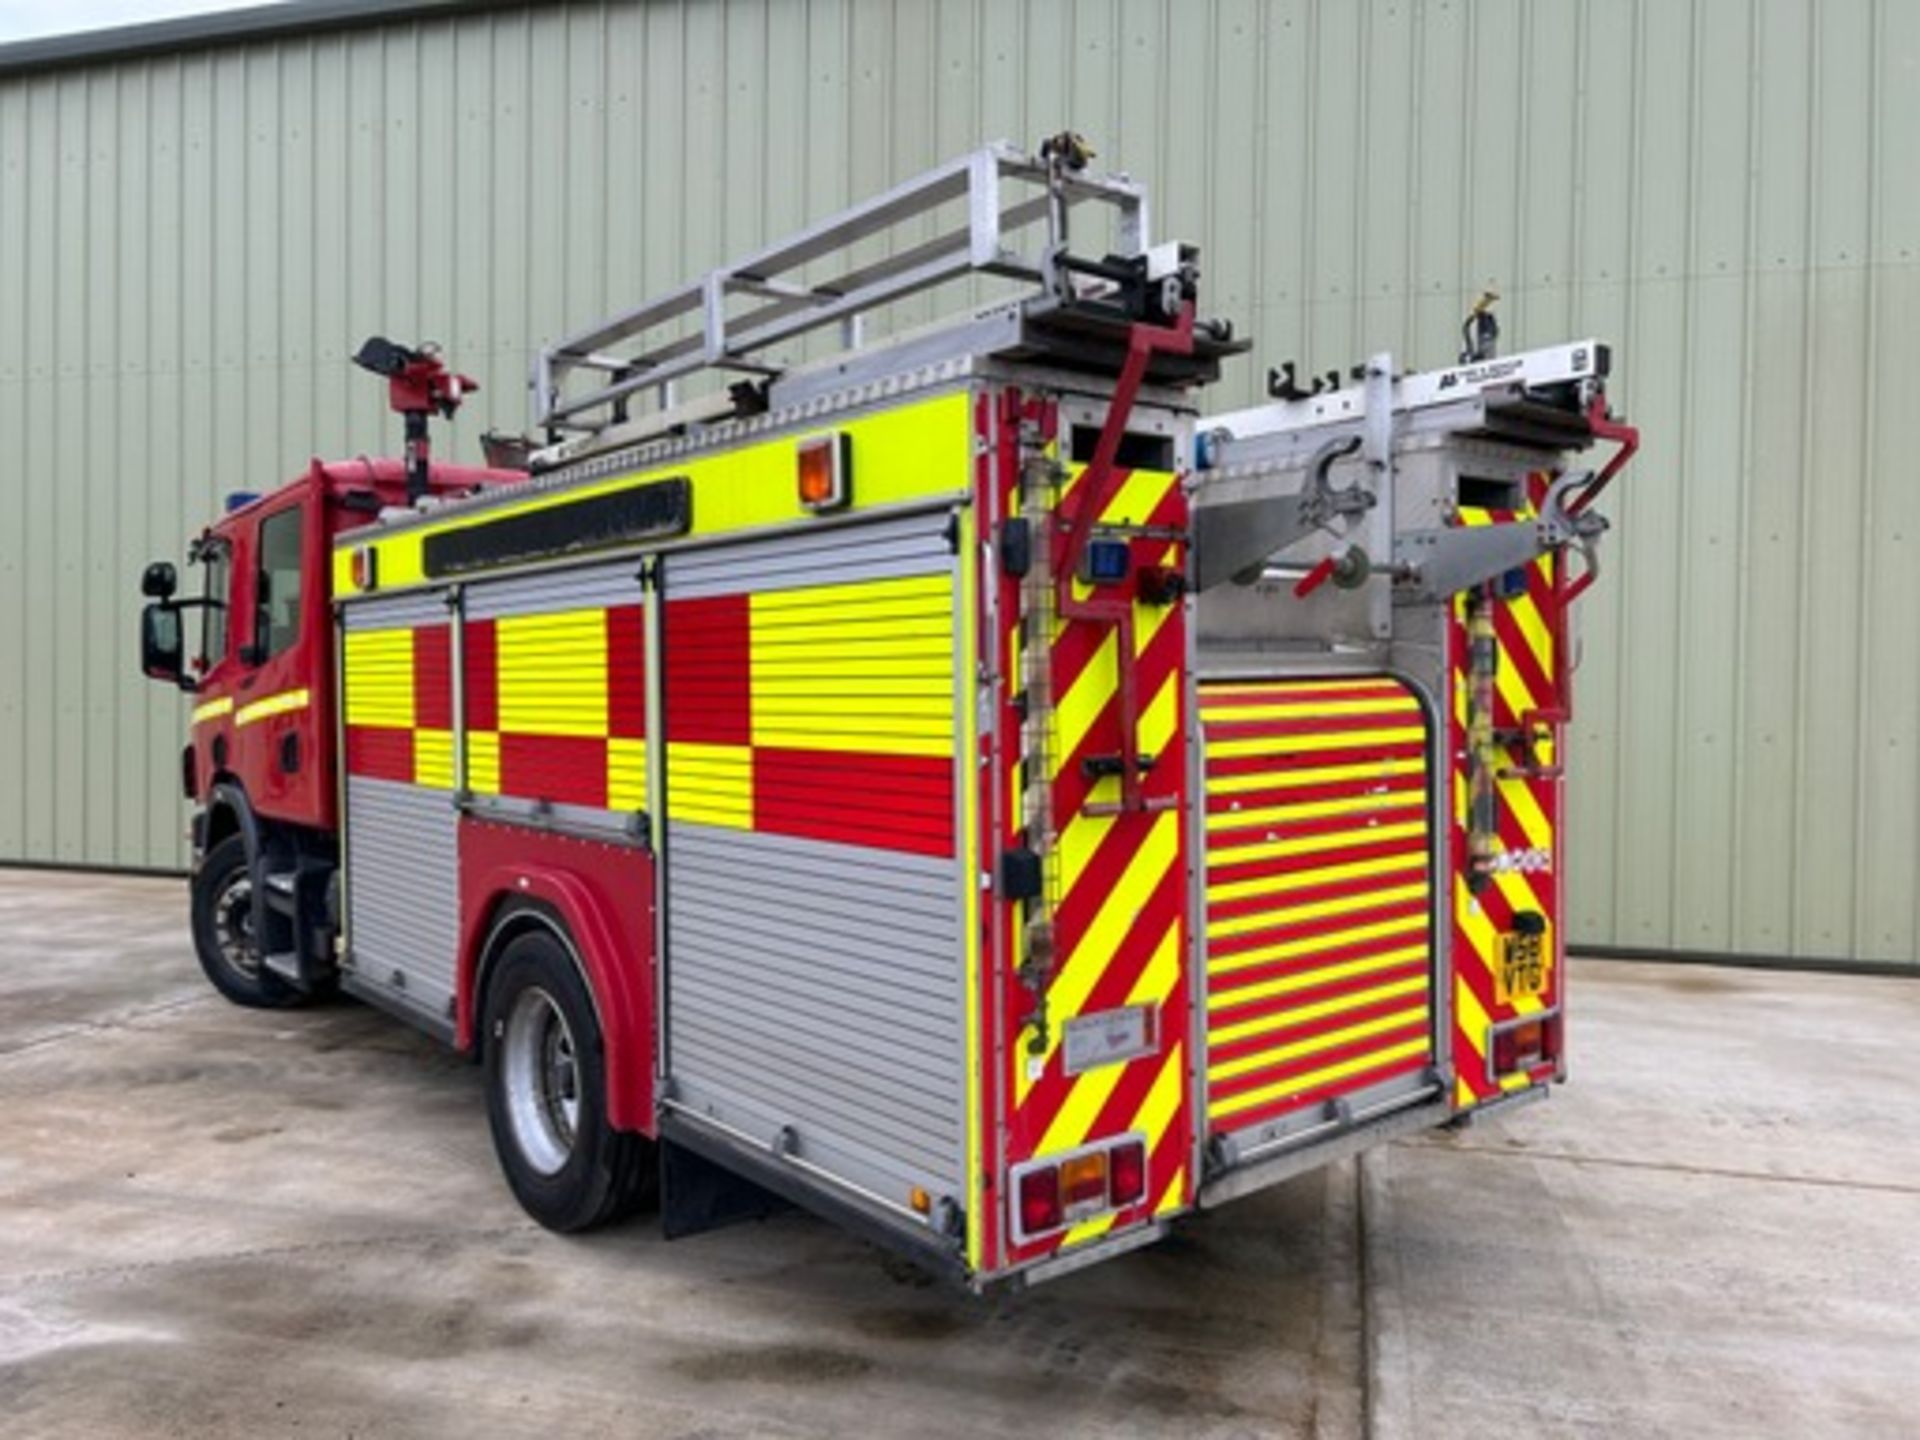 Scania Excalibur 94D 260 Fire Appliance - Image 3 of 26